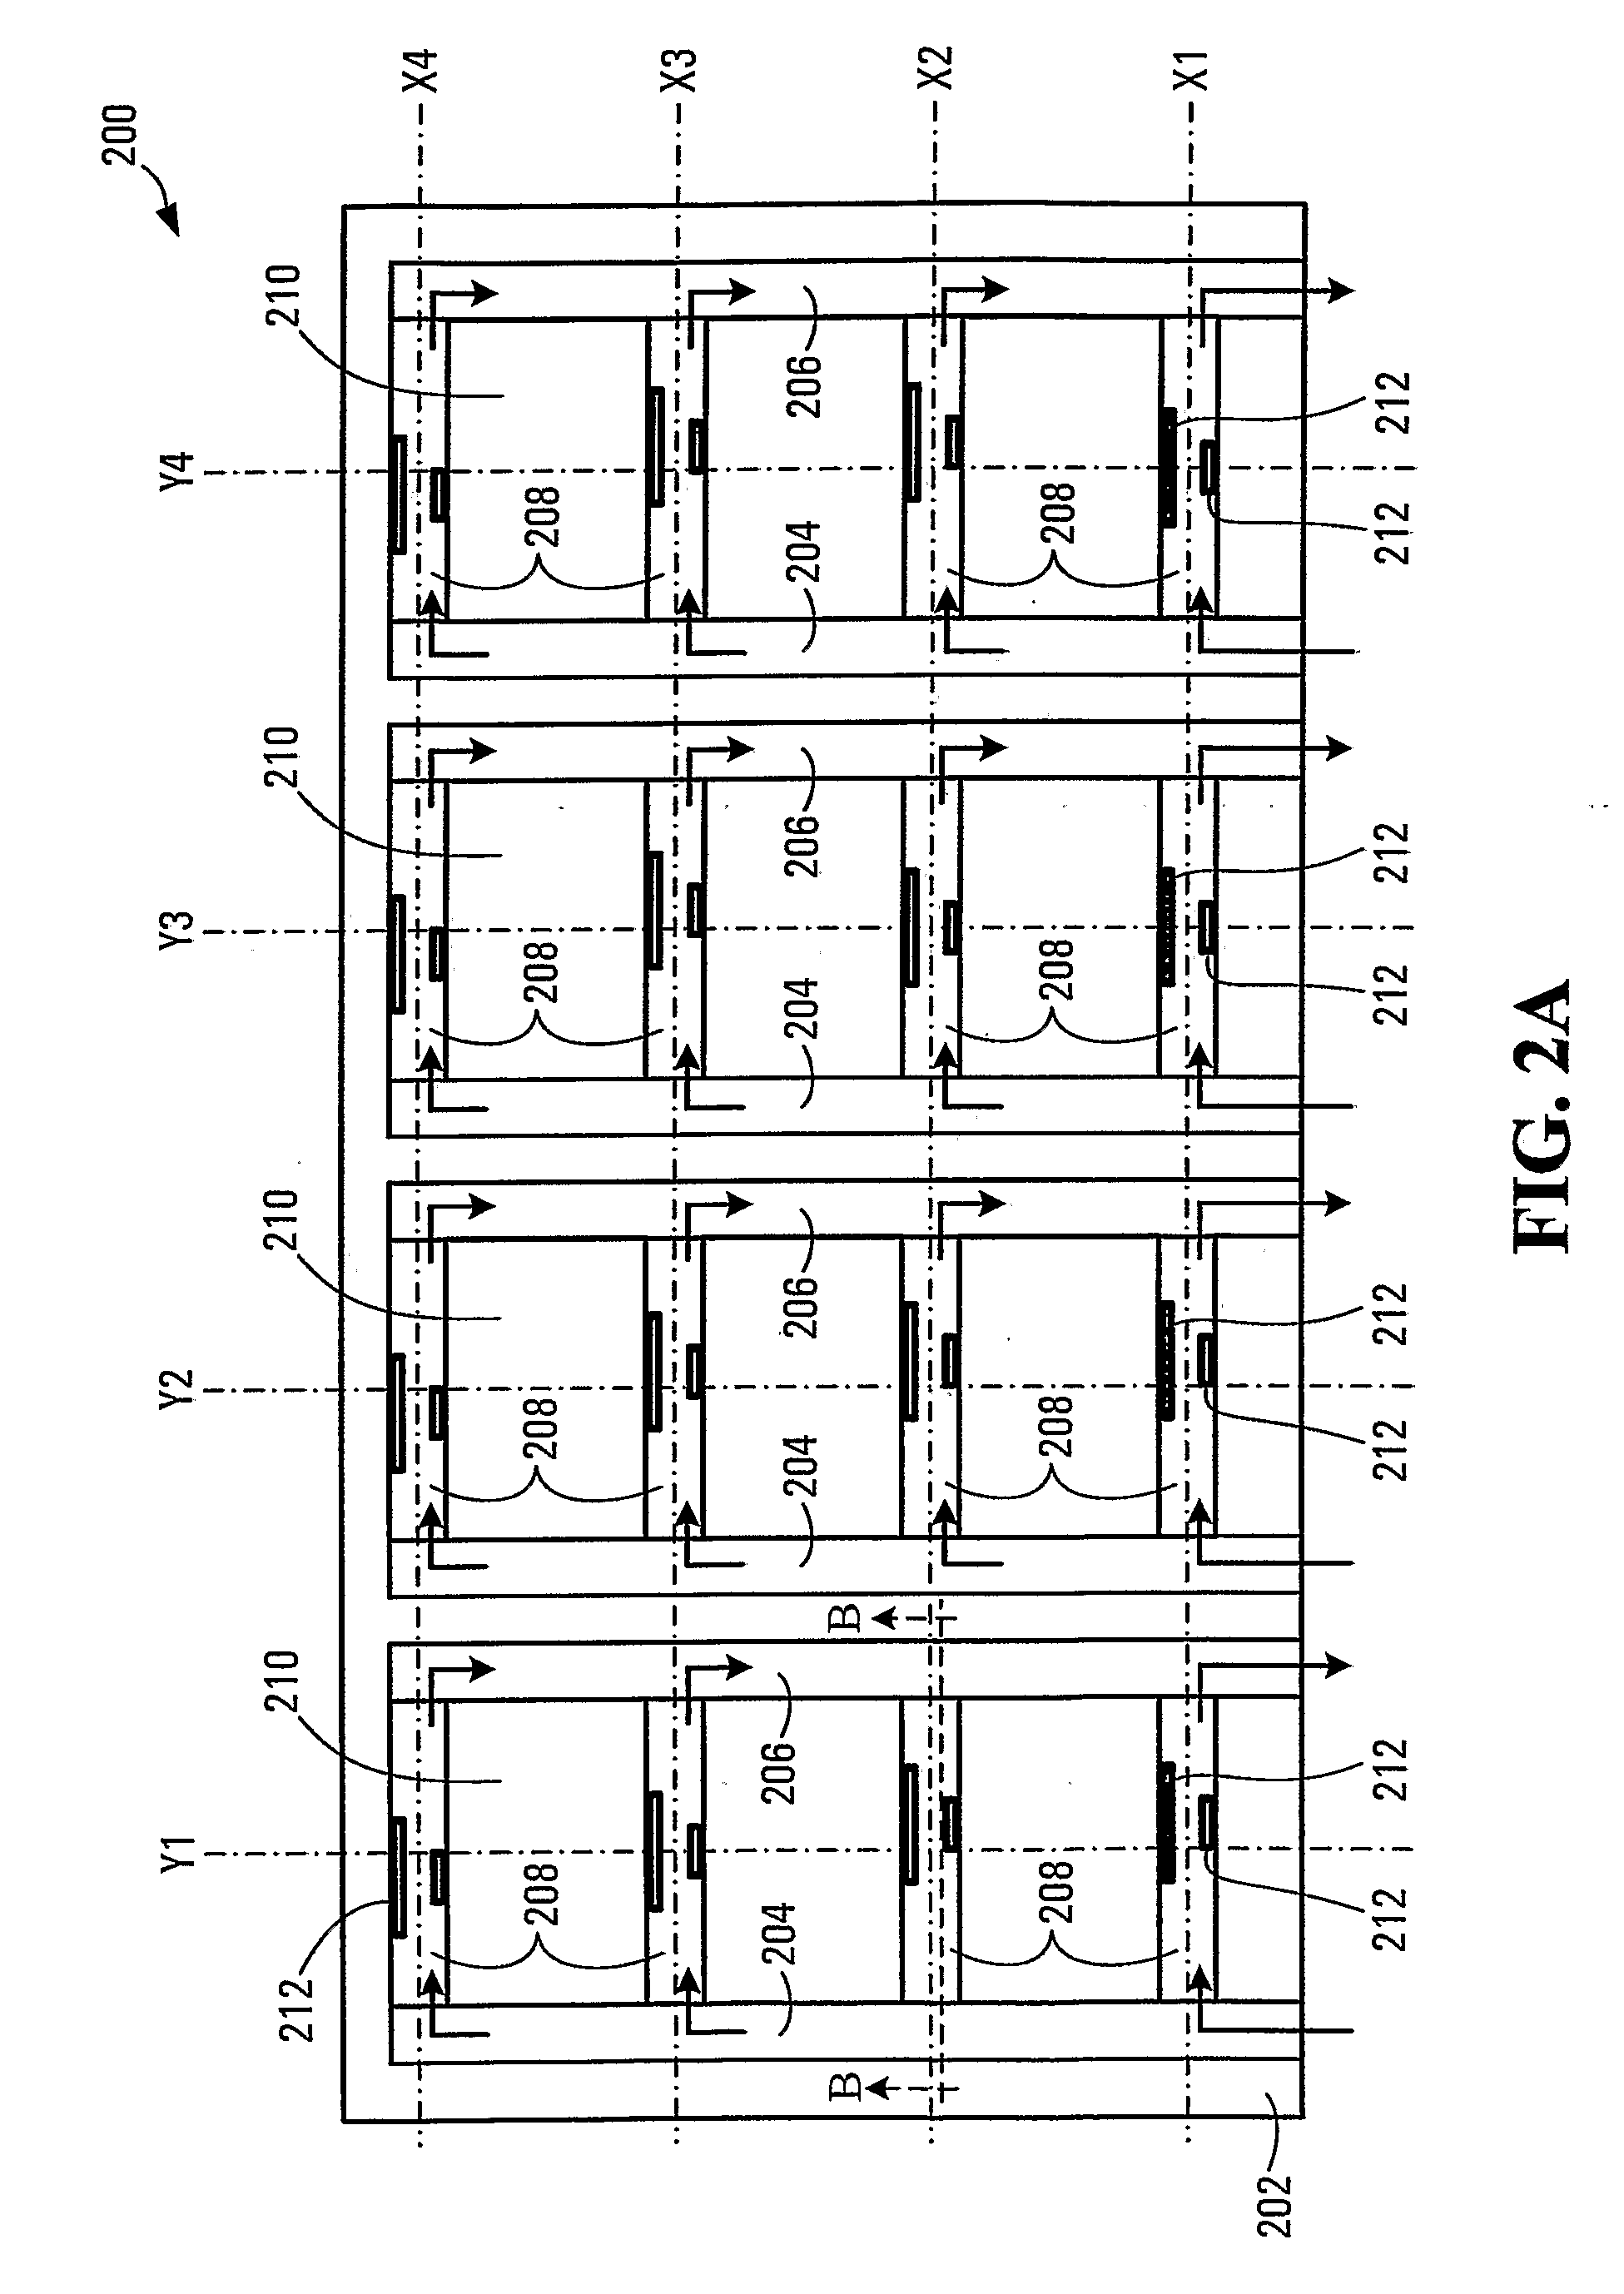 Microchip and Method for Detecting Molecules and Molecular Interactions